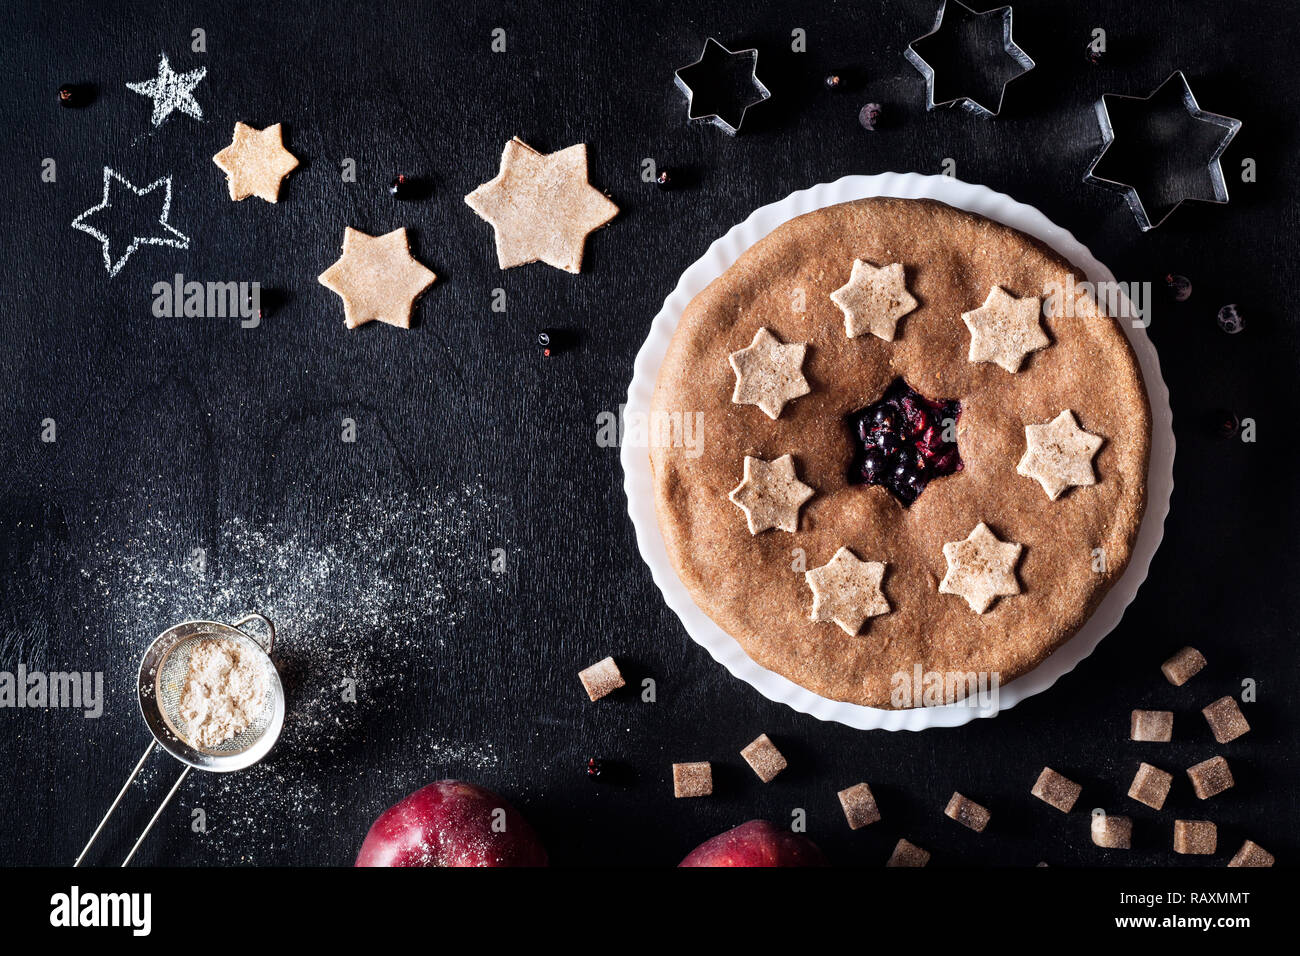 Vegan homemade pie from currant and apples on black background Stock Photo